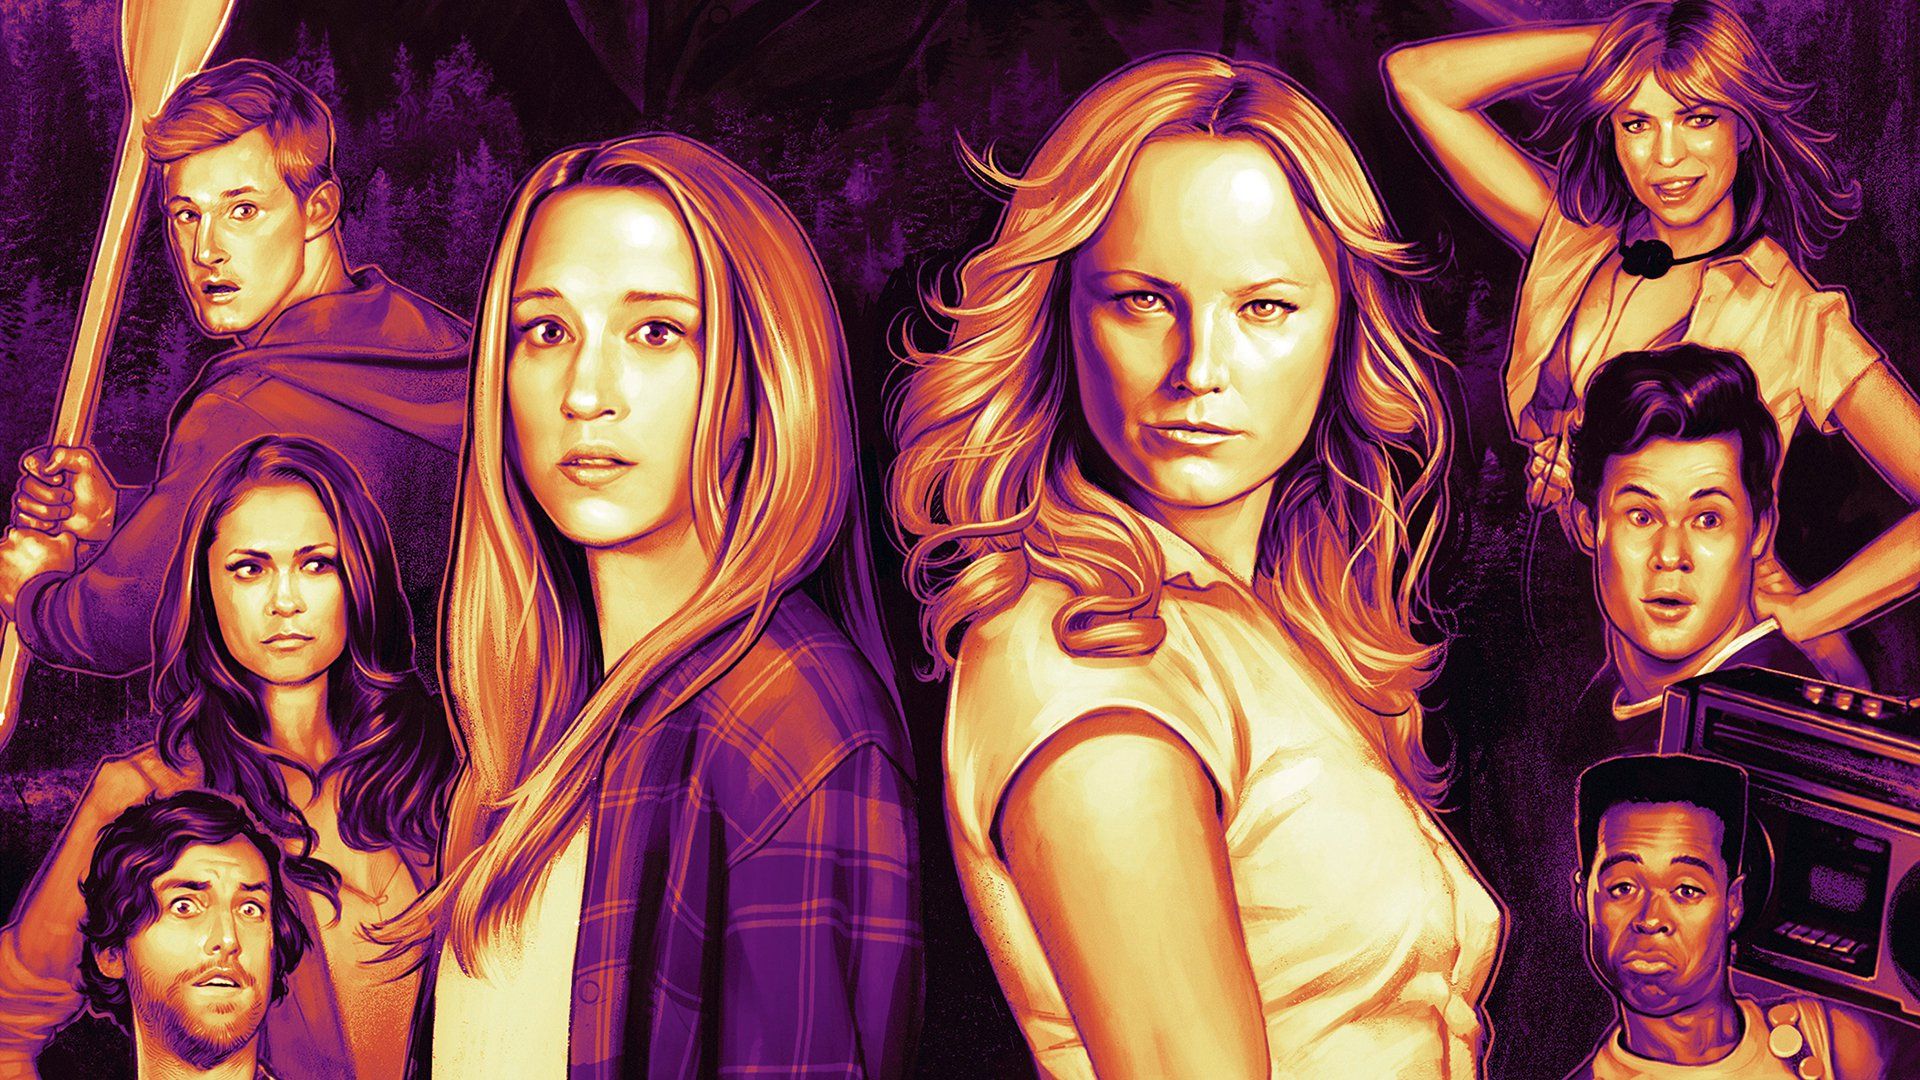 The Final Girls background